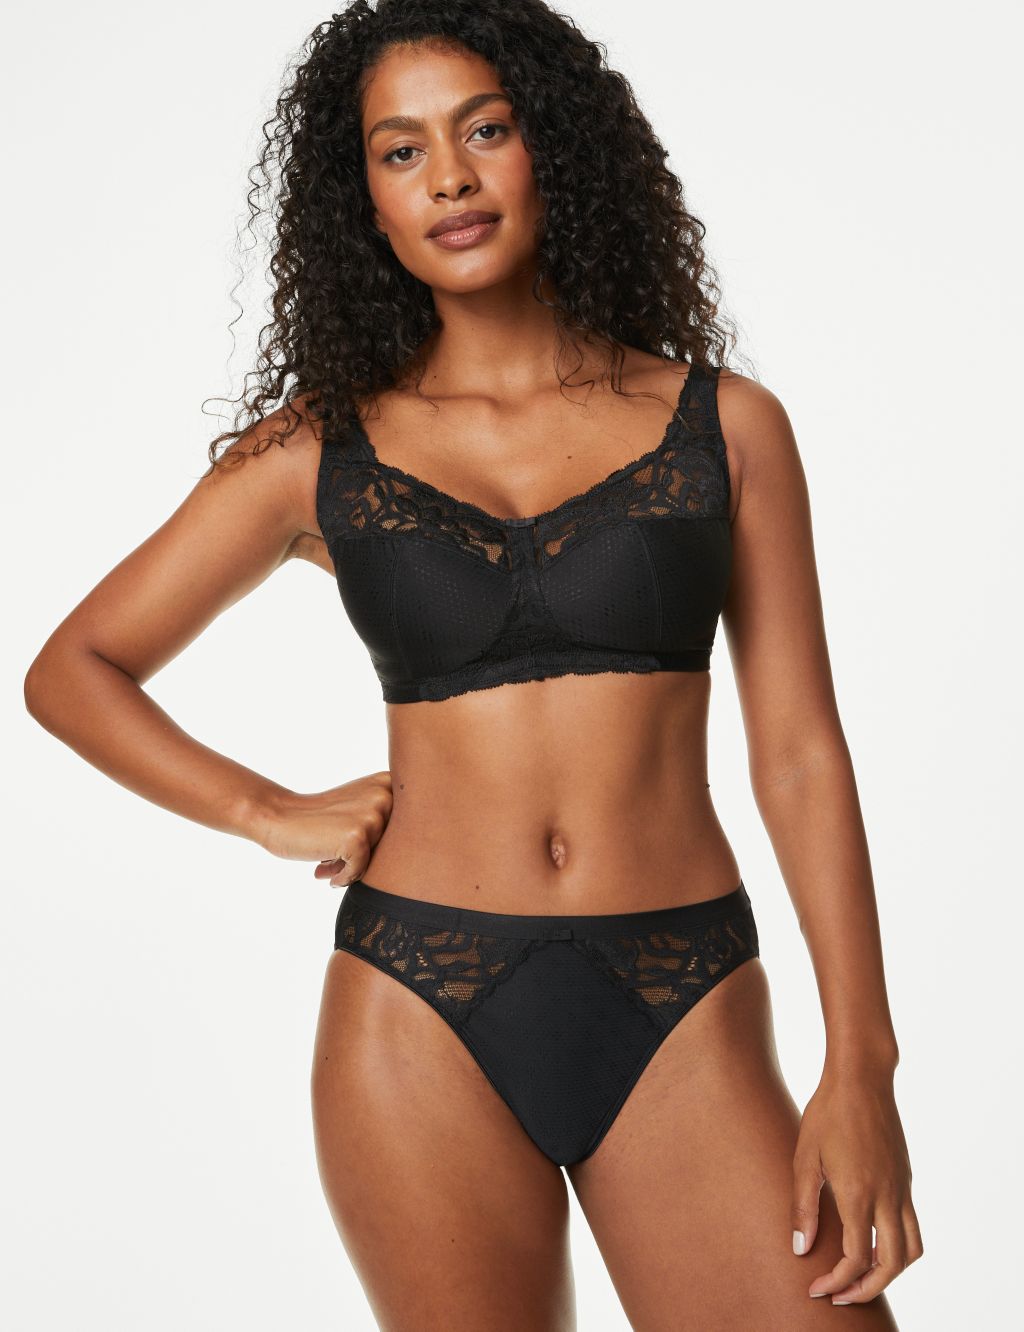 M&S Total Support Non-Wired Mesh lace bra Black sizes 36 - 42 B C D DD E  cups (36D) : : Everything Else